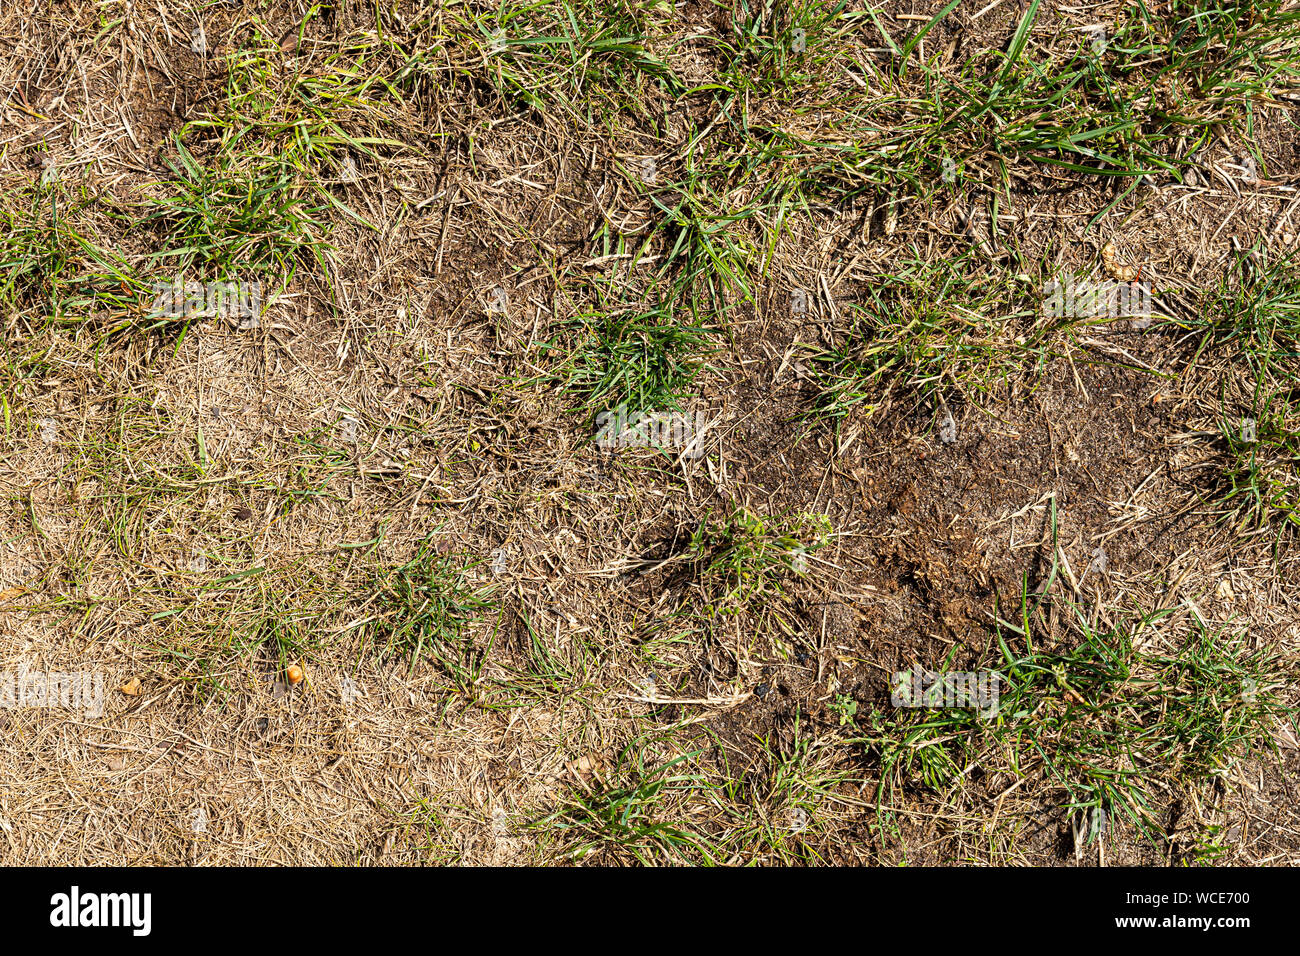 Dried lawn due to hot summer in a garden Stock Photo